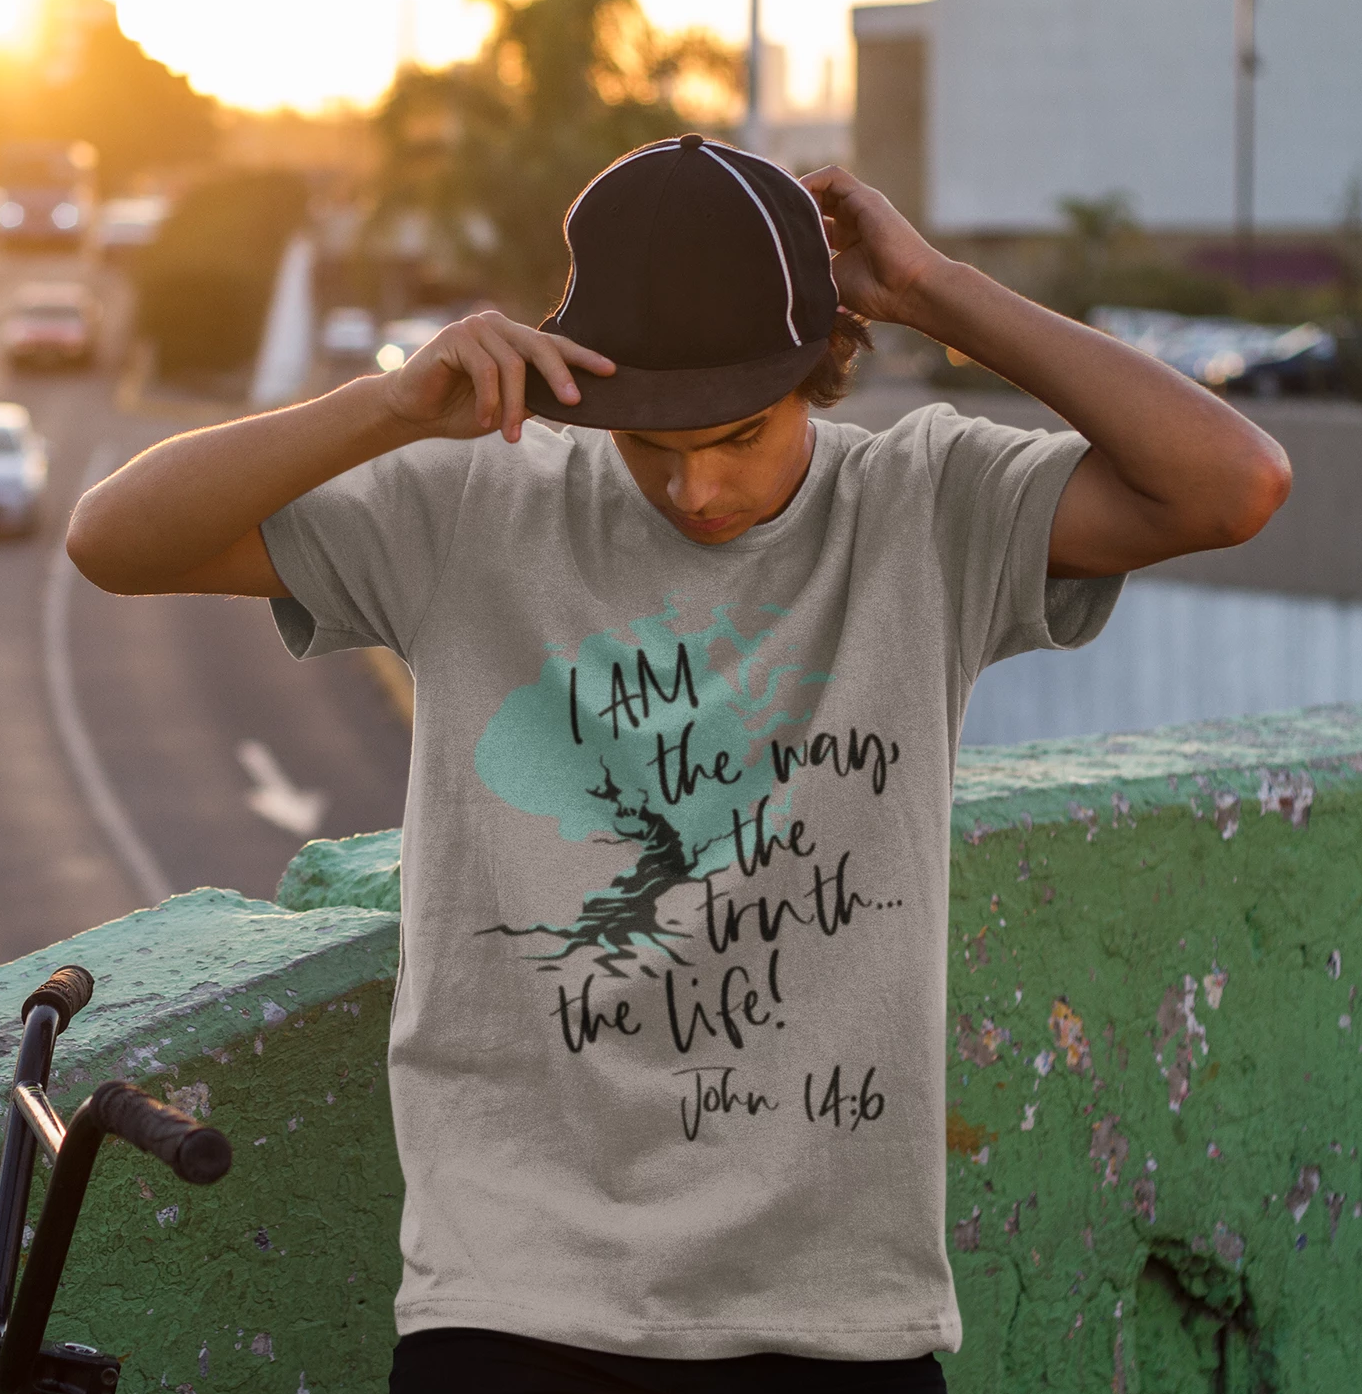 "I AM" the Way, the Truth, The Life John 14:6 Inspirational Jesus T-Shirt - - Endlessly Trendy Boutique